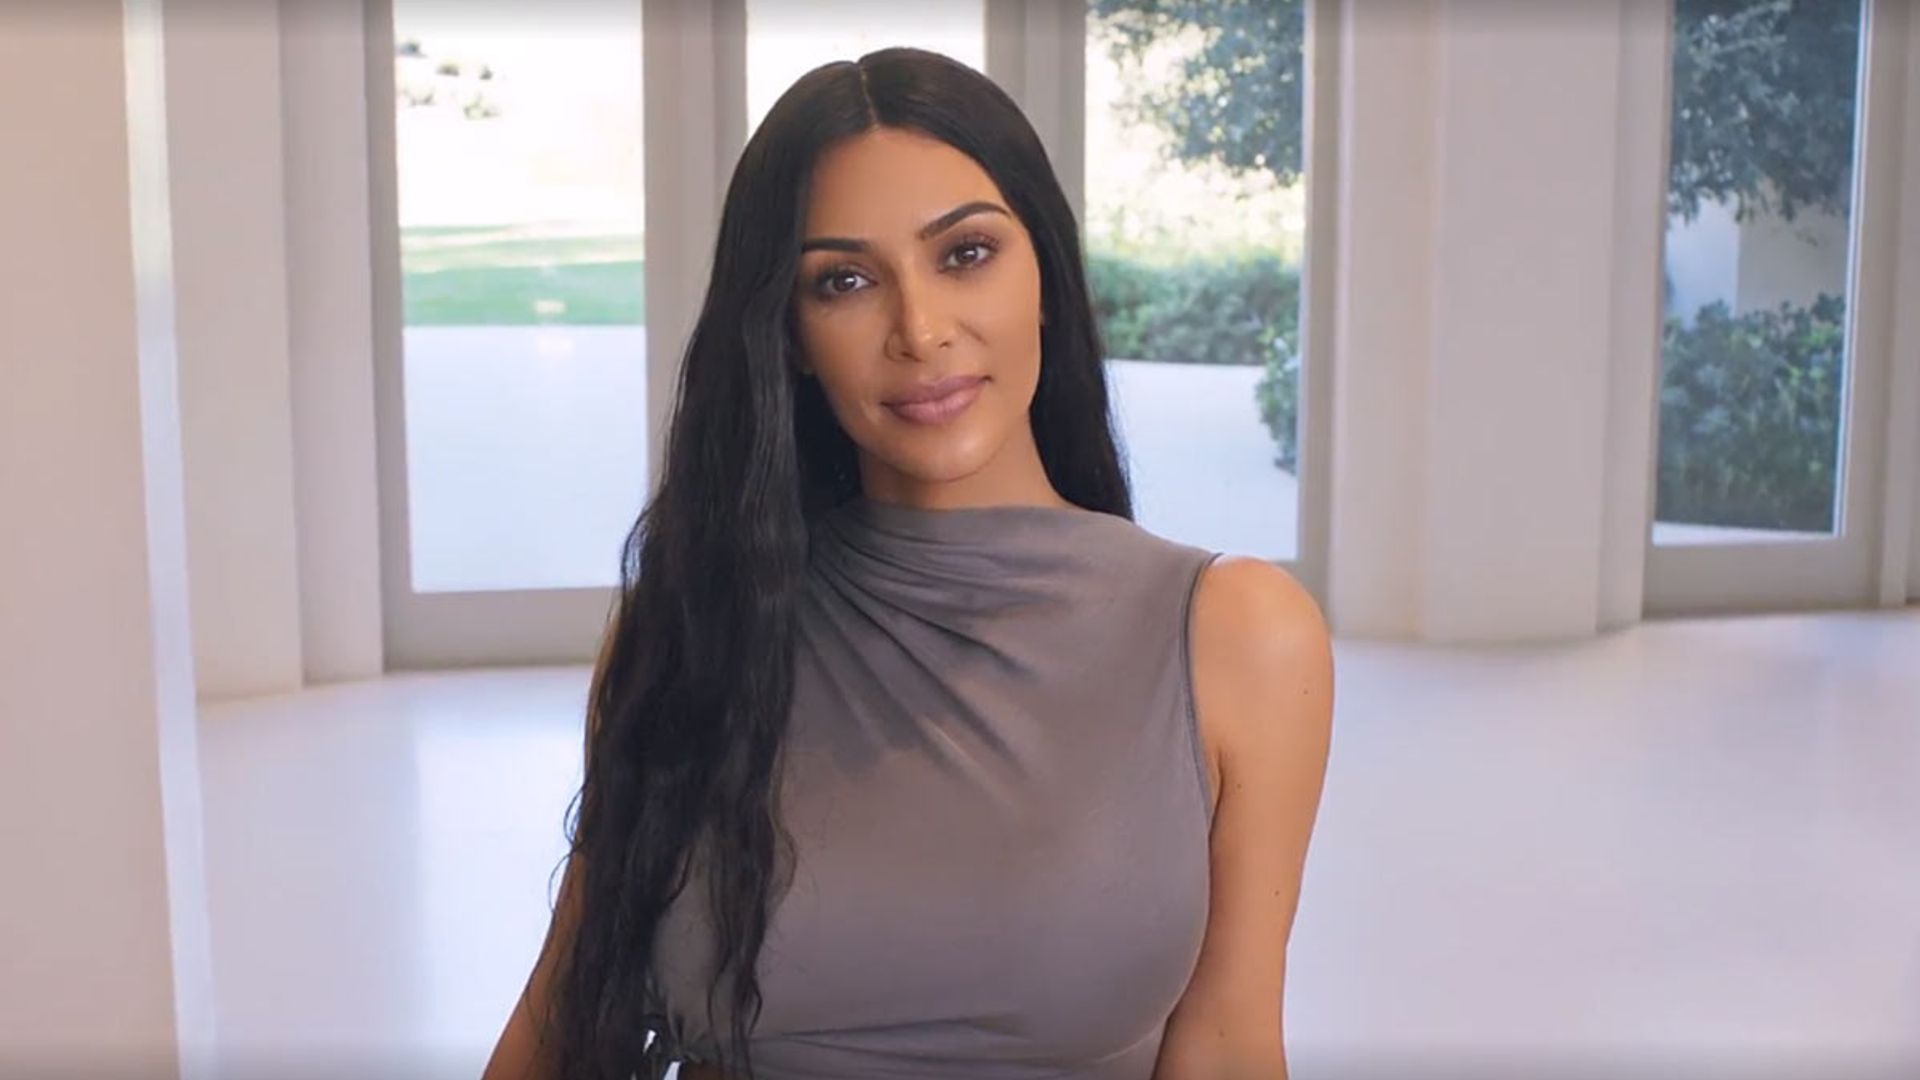 Kim Kardashian shares a rare glimpse into her bathroom and it includes an epic lavender forest